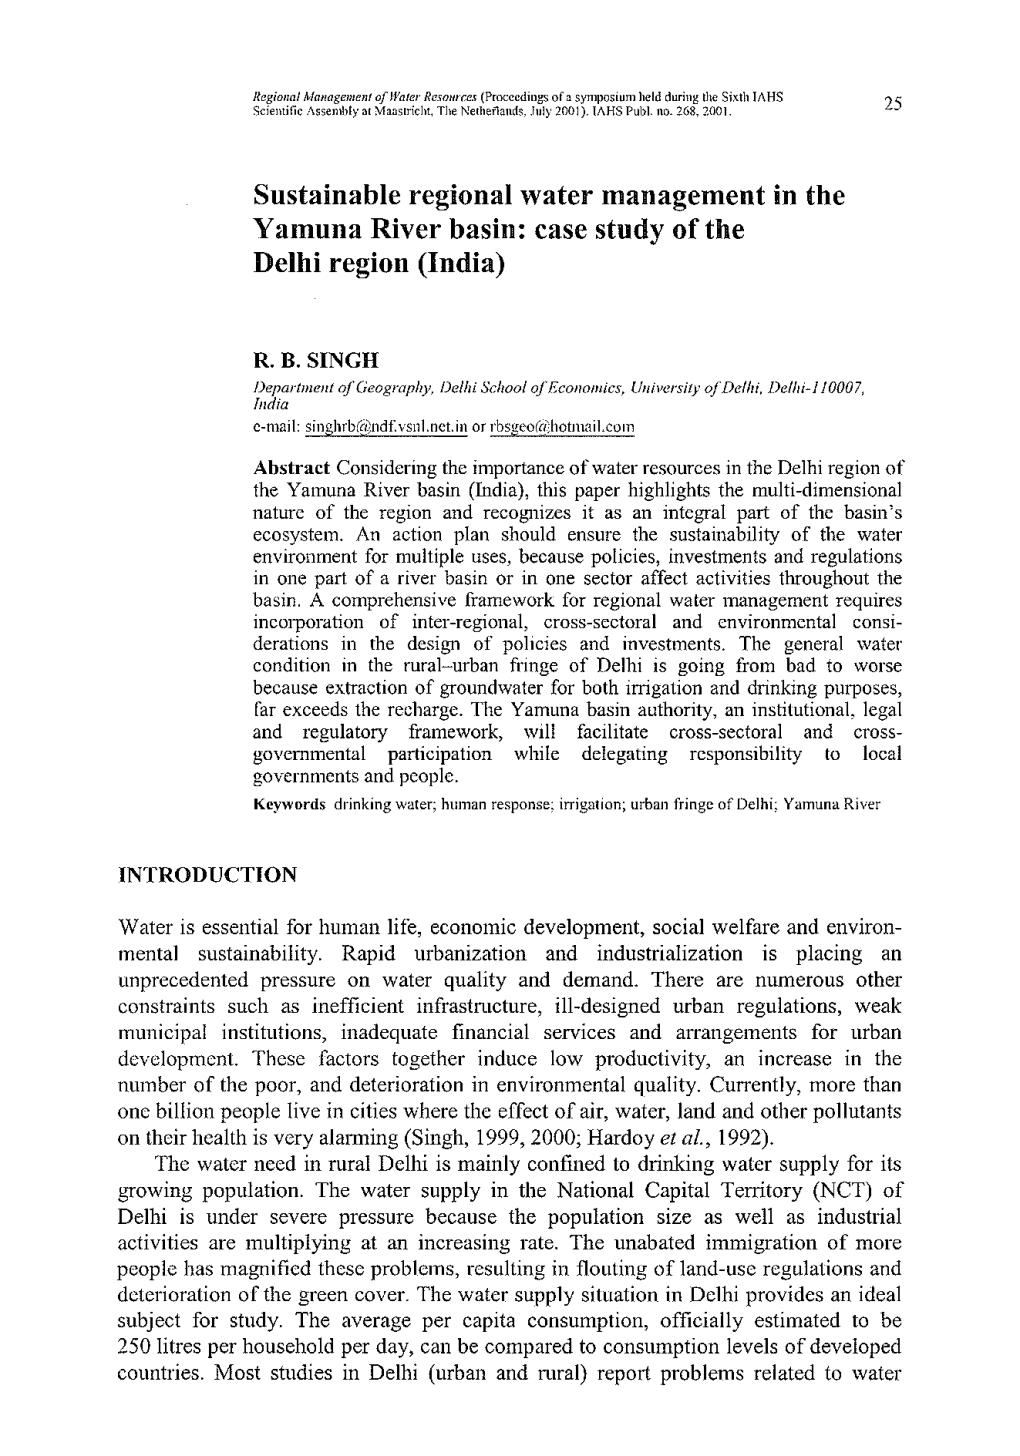 Sustainable Regional Water Management in the Yamuna River Basin: Case Study of the Delhi Region (India)